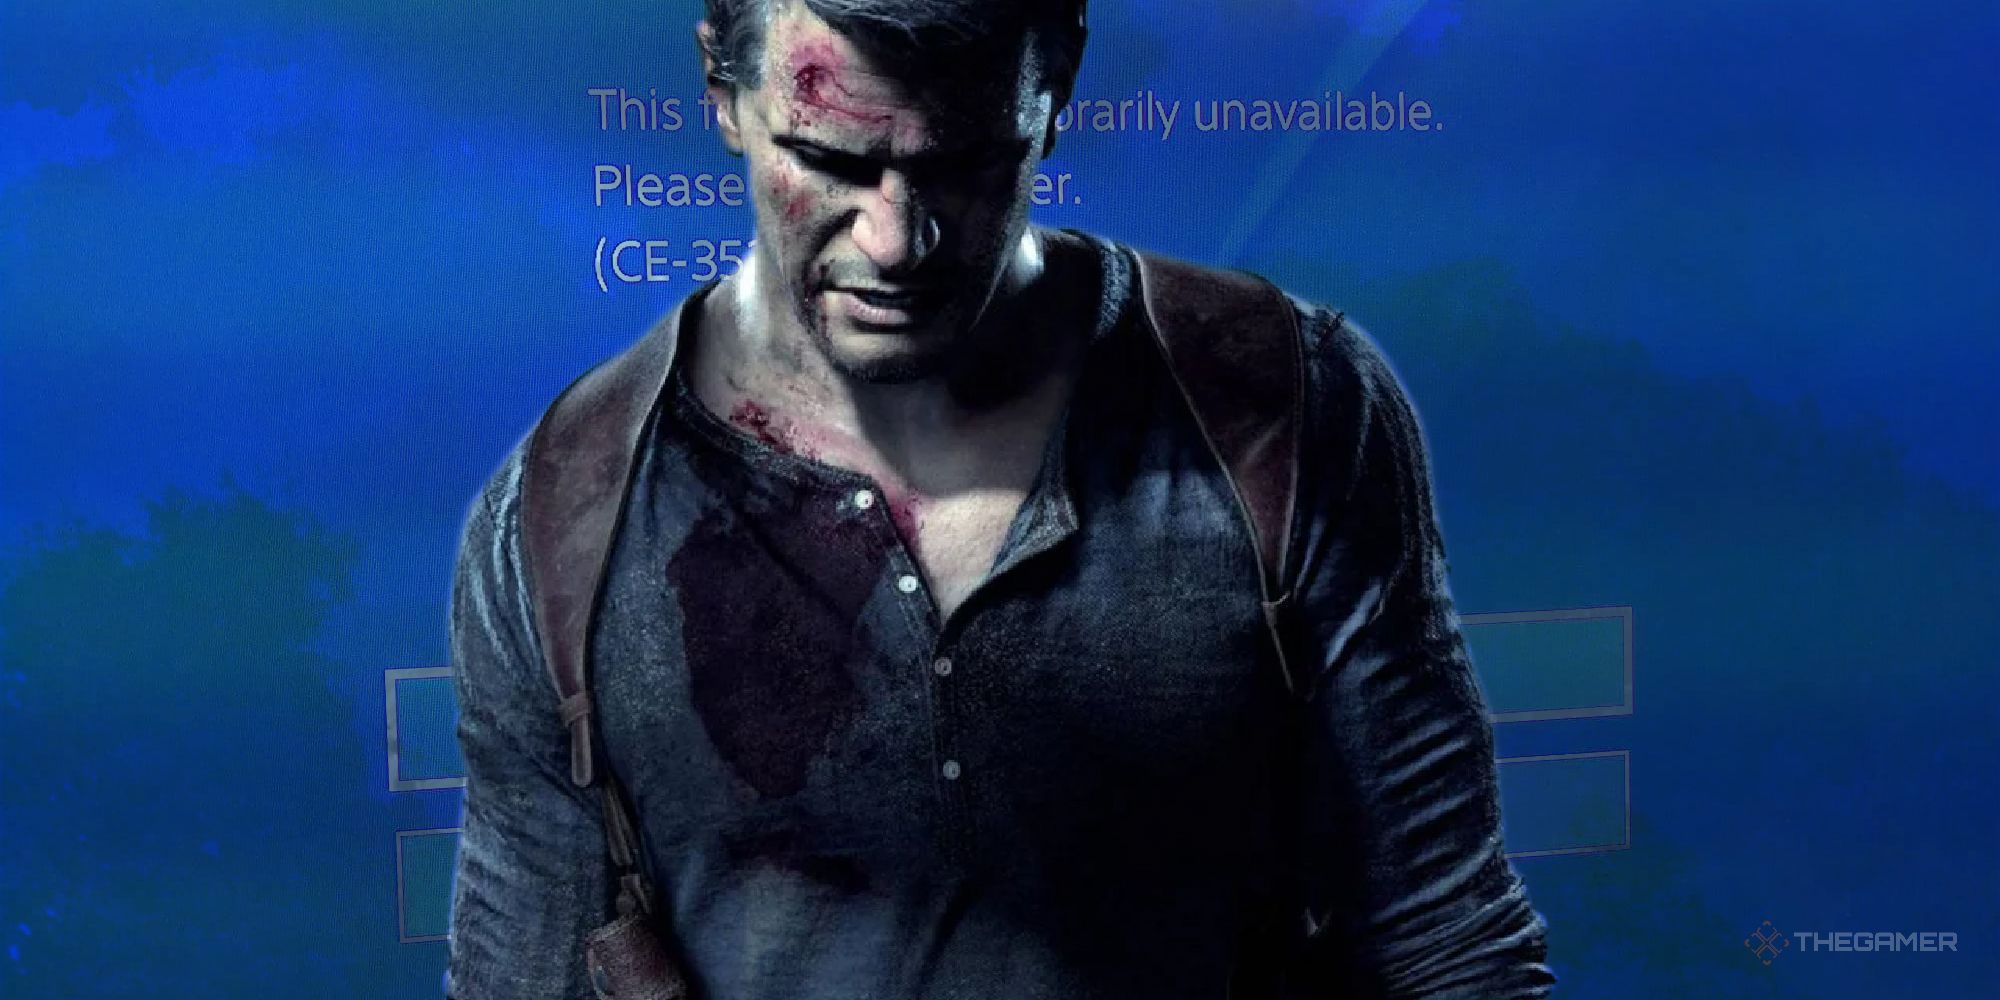 Nathan Drake from Uncharted looking glum in front of a PSN screen that says 